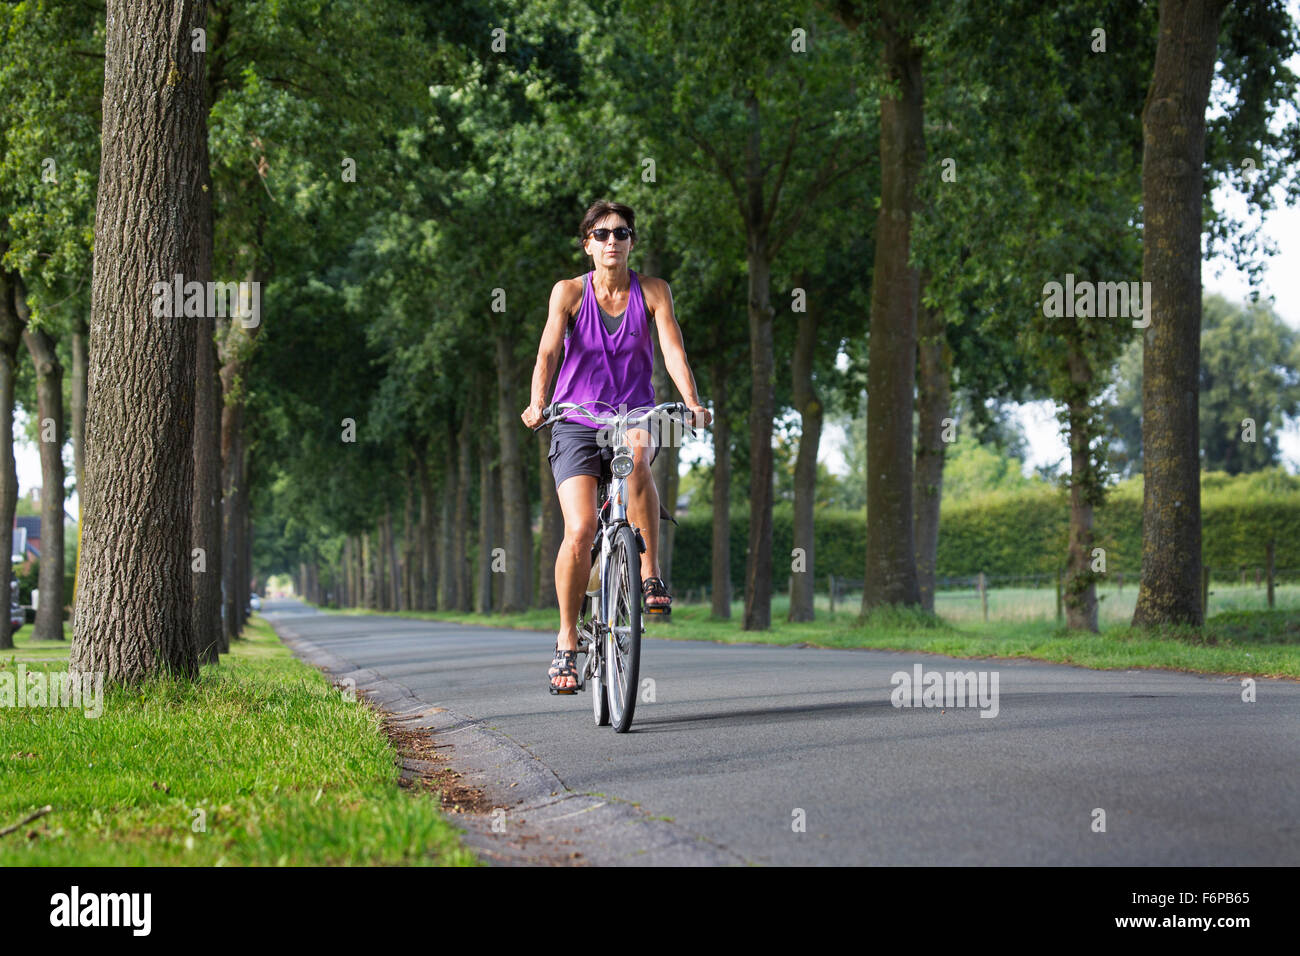 Woman on bicycle cycling through rural landscape in summer Stock Photo